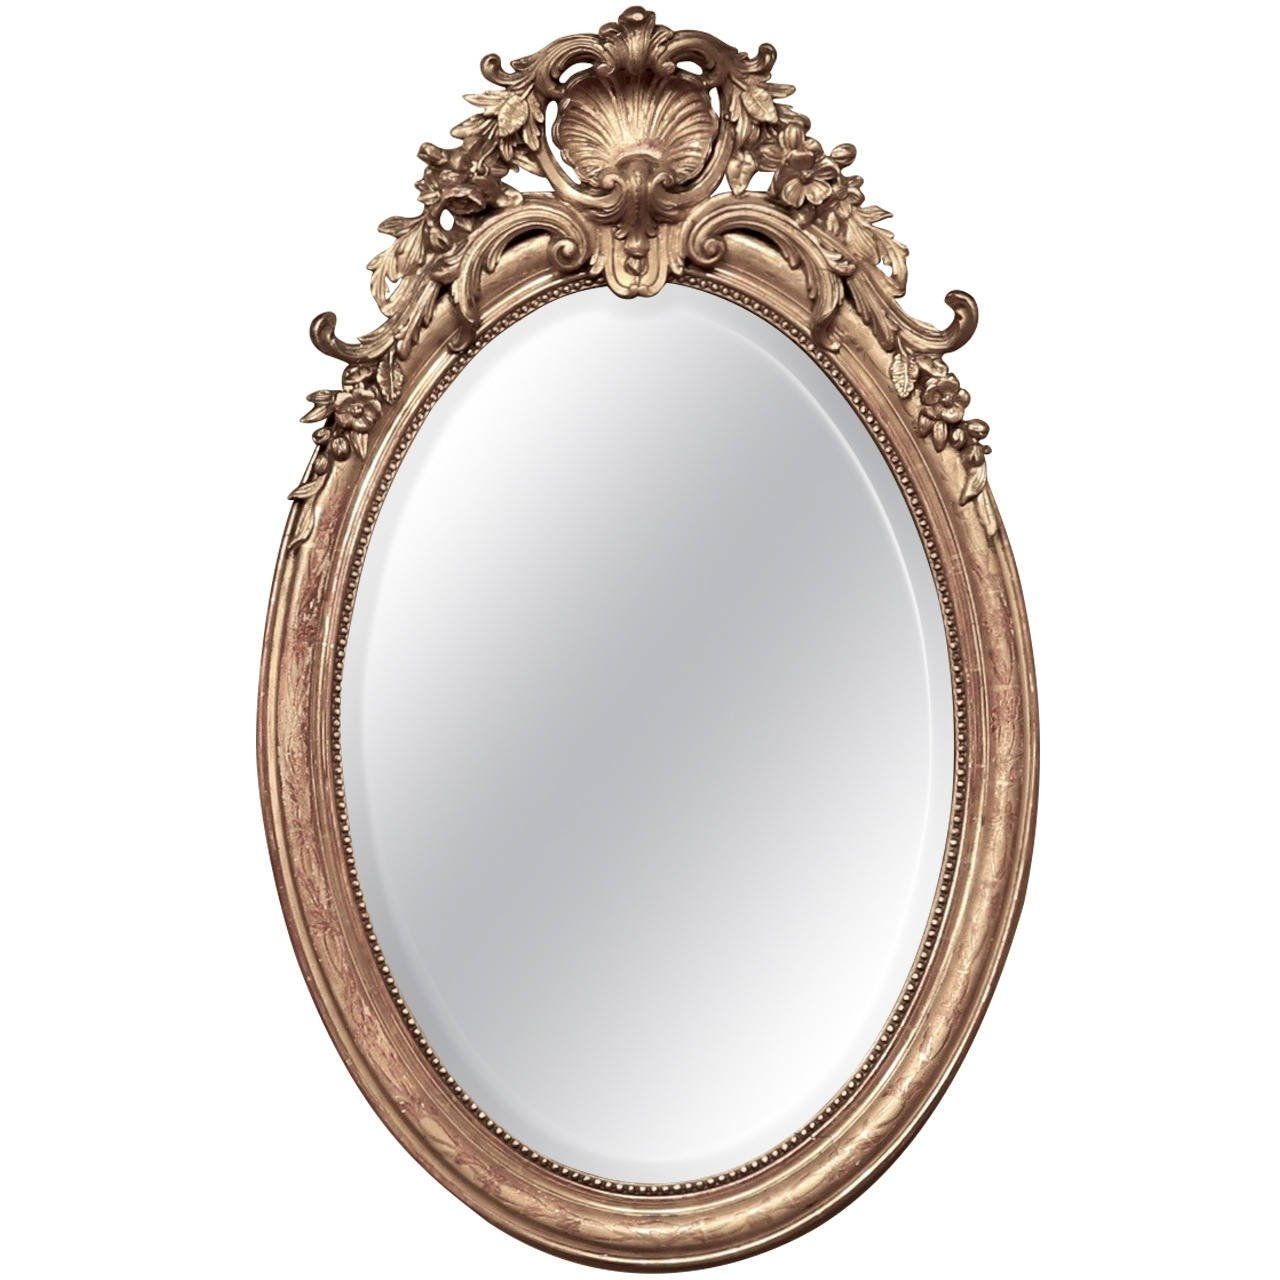 19th Century French Neoclassical Gilded Oval Mirror At 1stdibs Pertaining To French Oval Mirror (View 8 of 15)